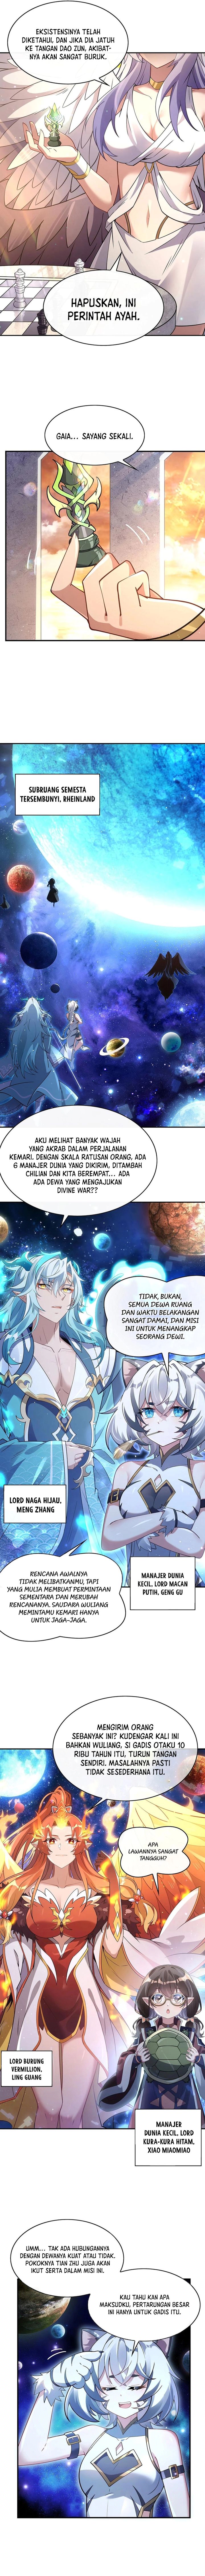 Dilarang COPAS - situs resmi www.mangacanblog.com - Komik my female apprentices are all big shots from the future 249 - chapter 249 250 Indonesia my female apprentices are all big shots from the future 249 - chapter 249 Terbaru 3|Baca Manga Komik Indonesia|Mangacan